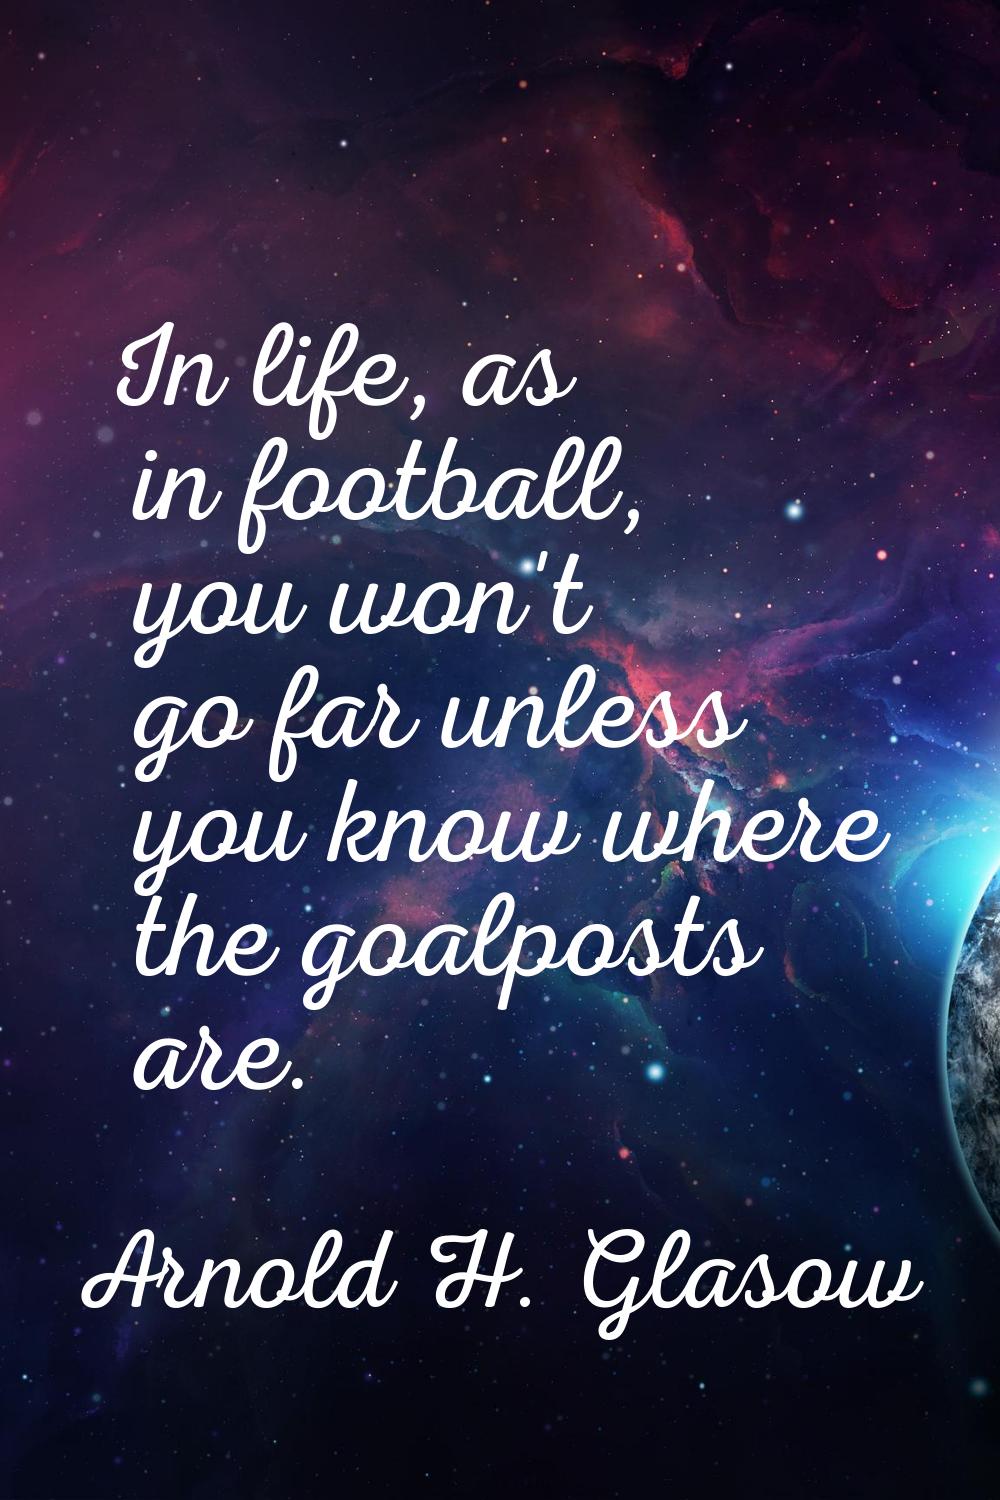 In life, as in football, you won't go far unless you know where the goalposts are.